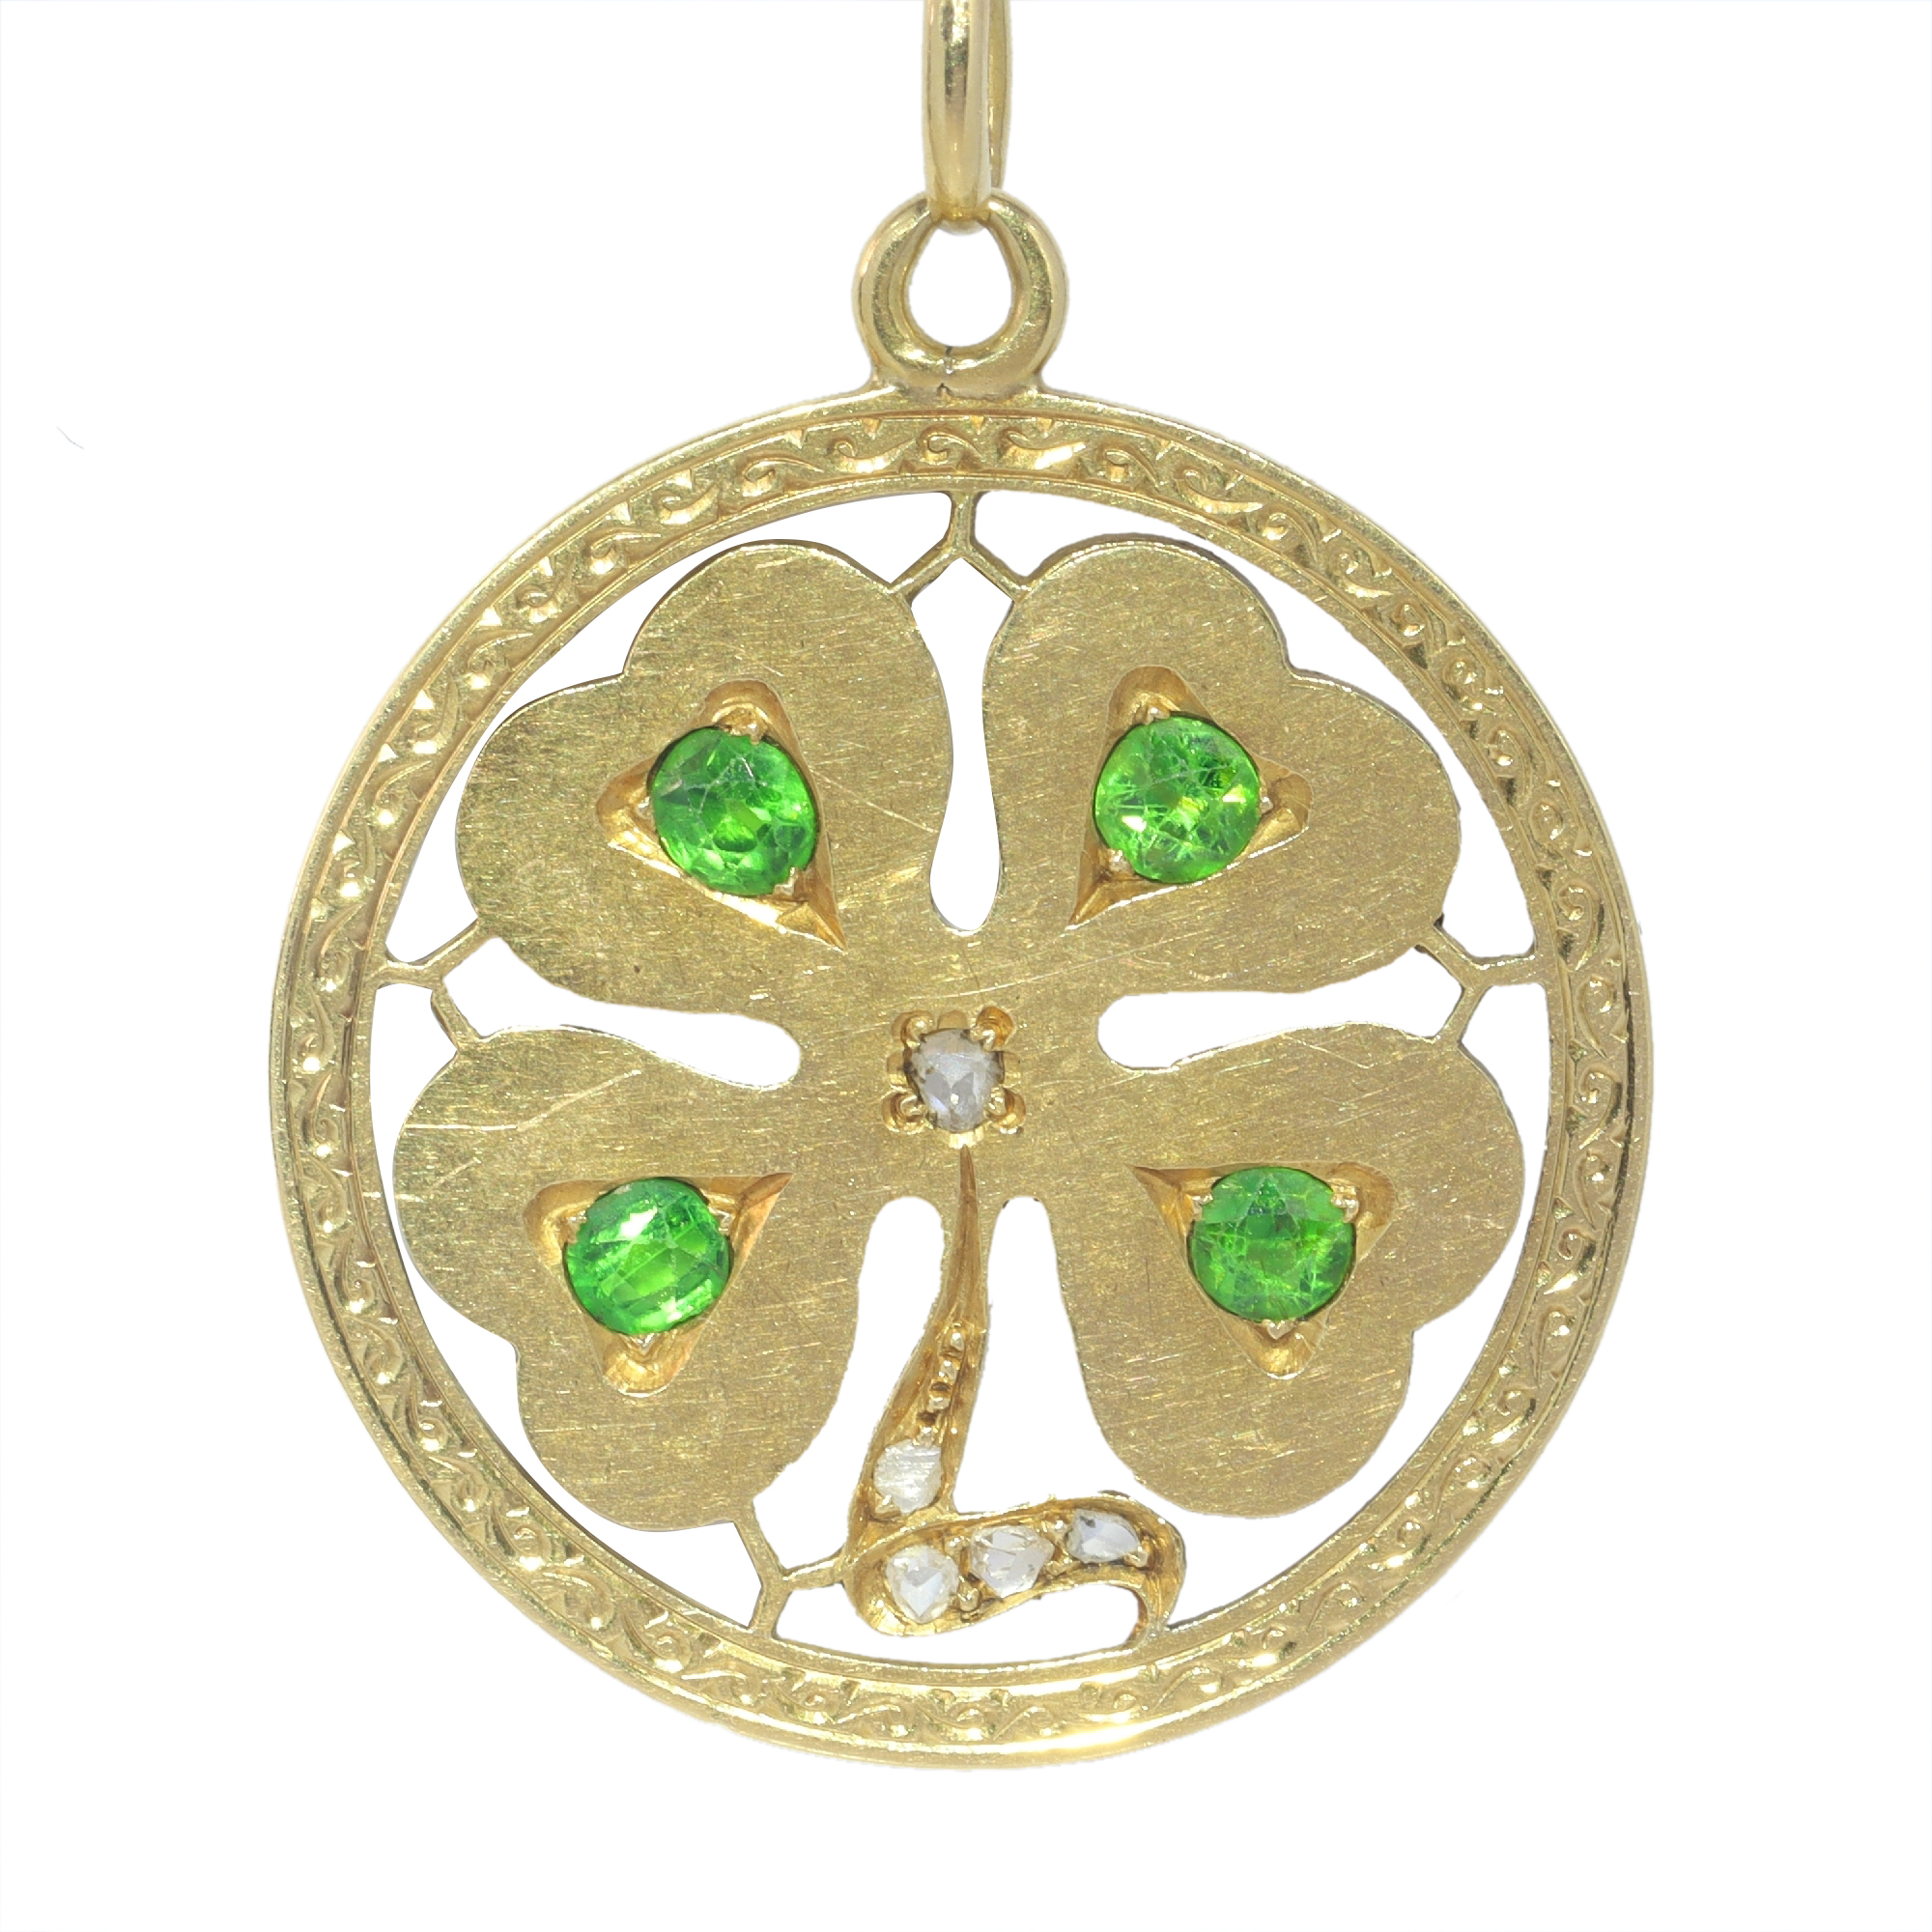 Vintage 1920's Art Deco four leaf clover luck charm set with real demantoid and diamonds